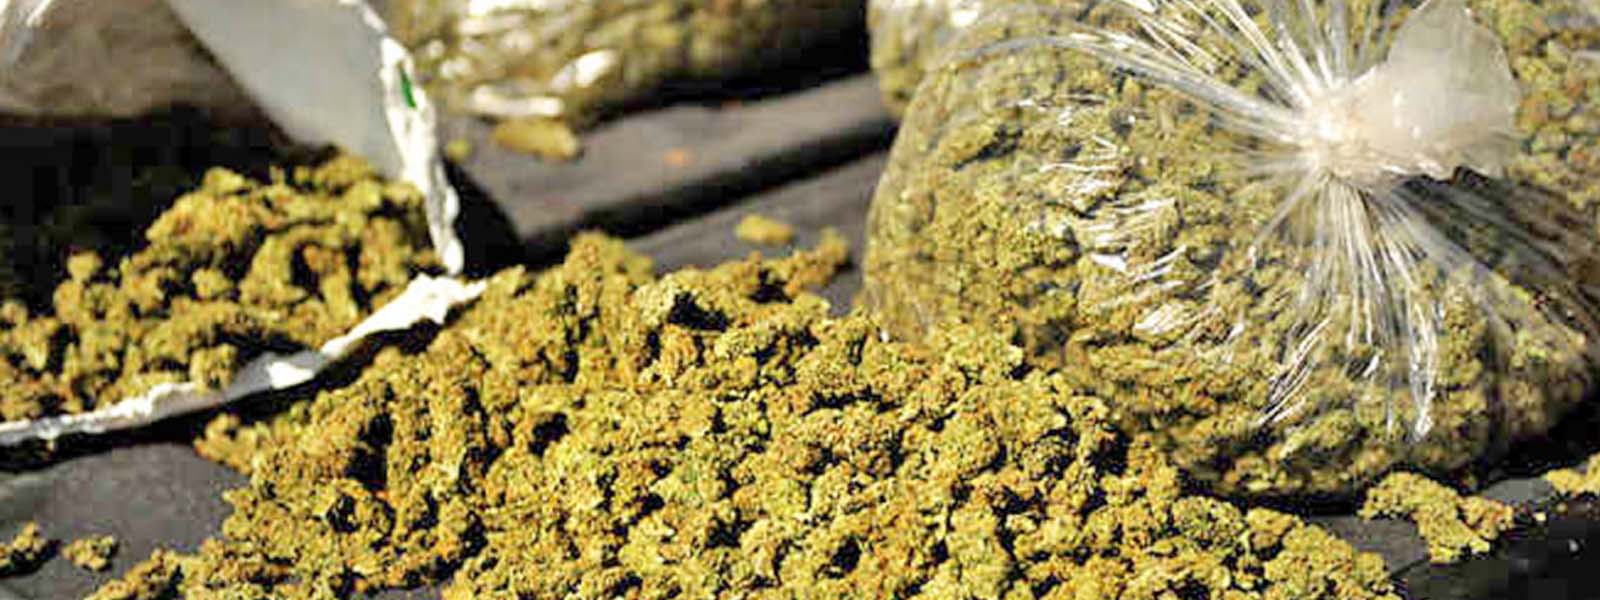 Suspect arrested in Mt Lavinia with 18 kg of ganja